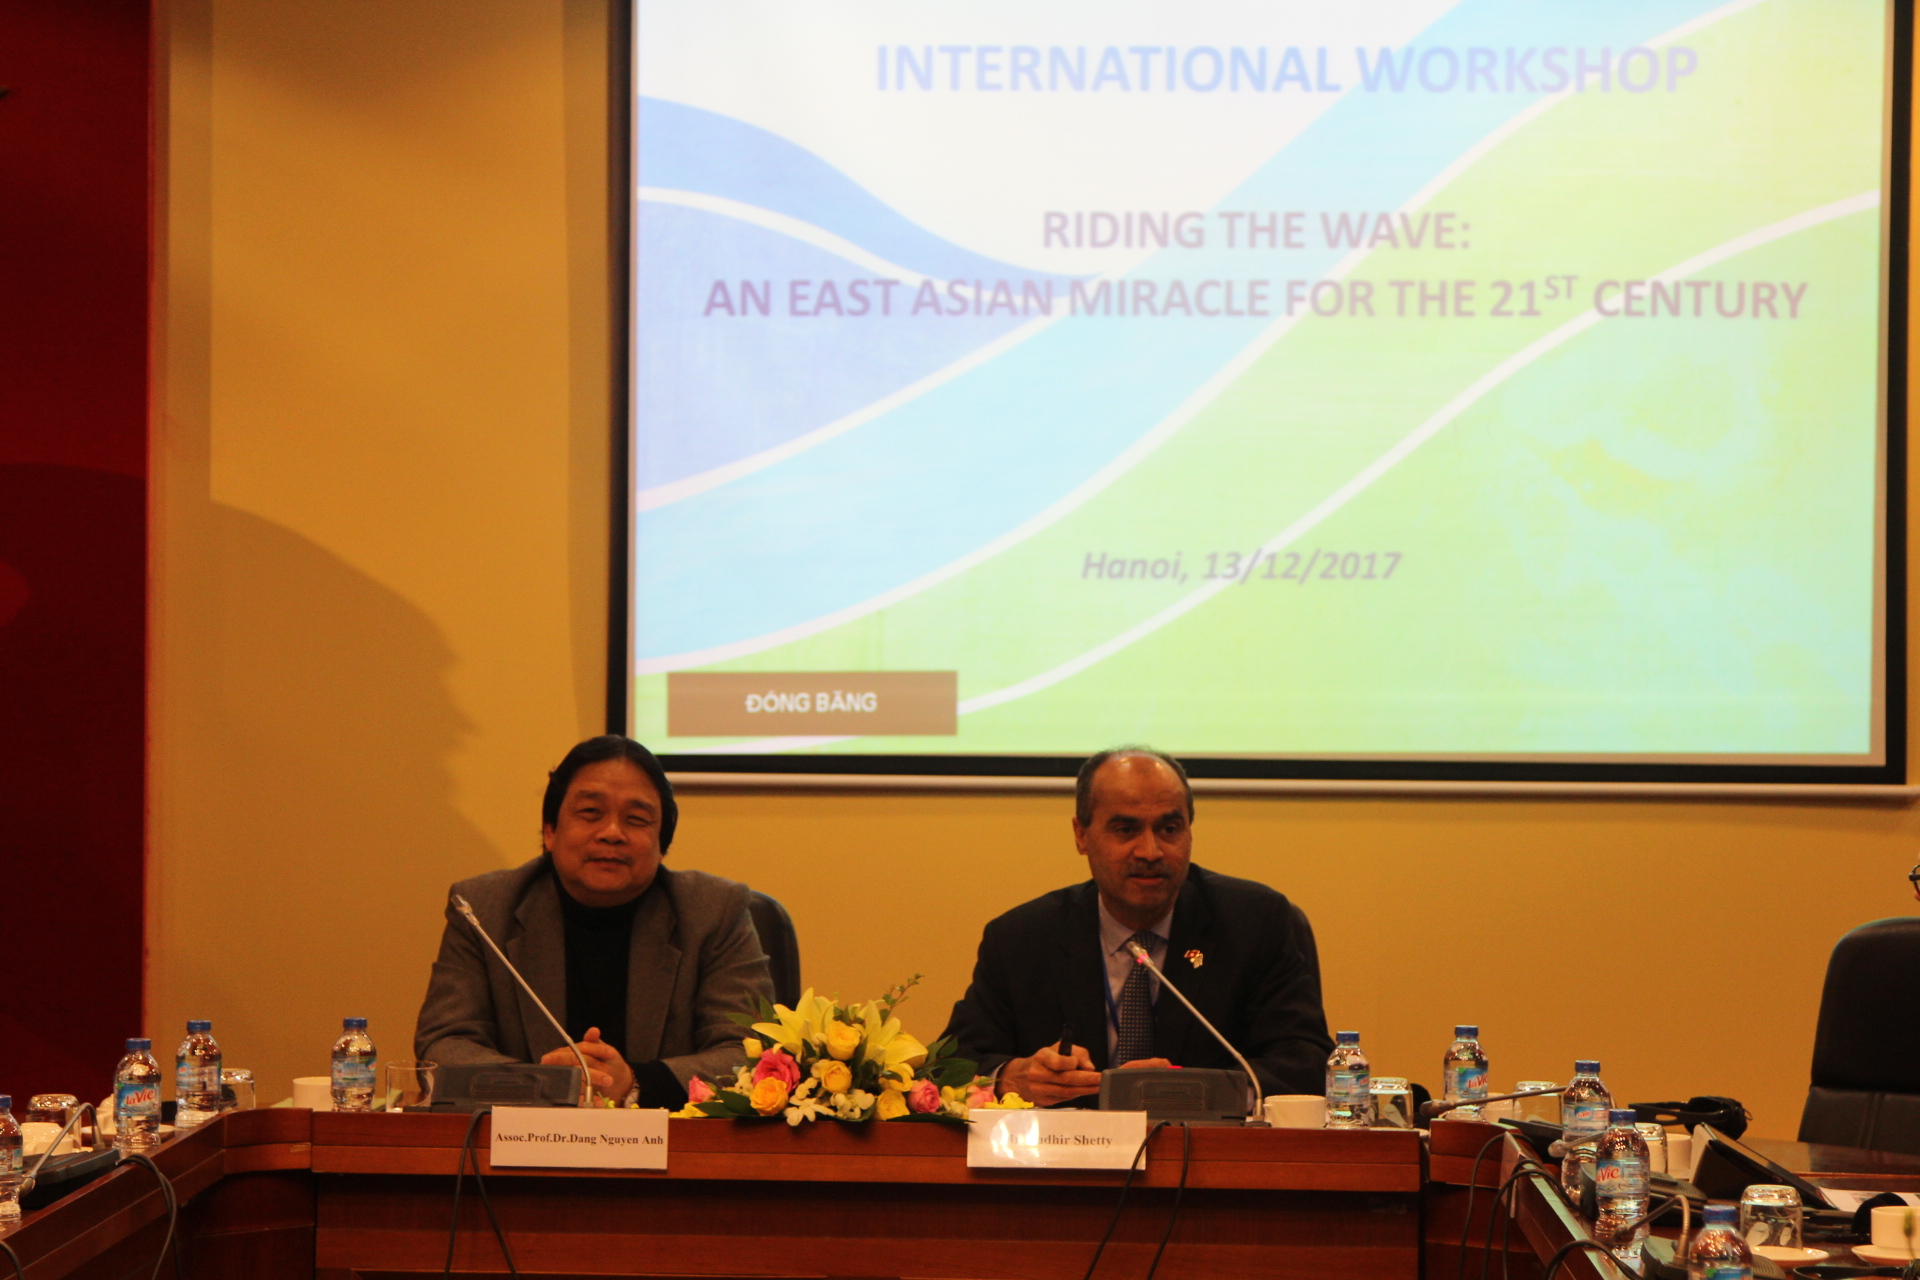 Mr. Sudhir Shetty and Assoc.Prof.Dr. Dang Nguyen Anh chaired the discussion